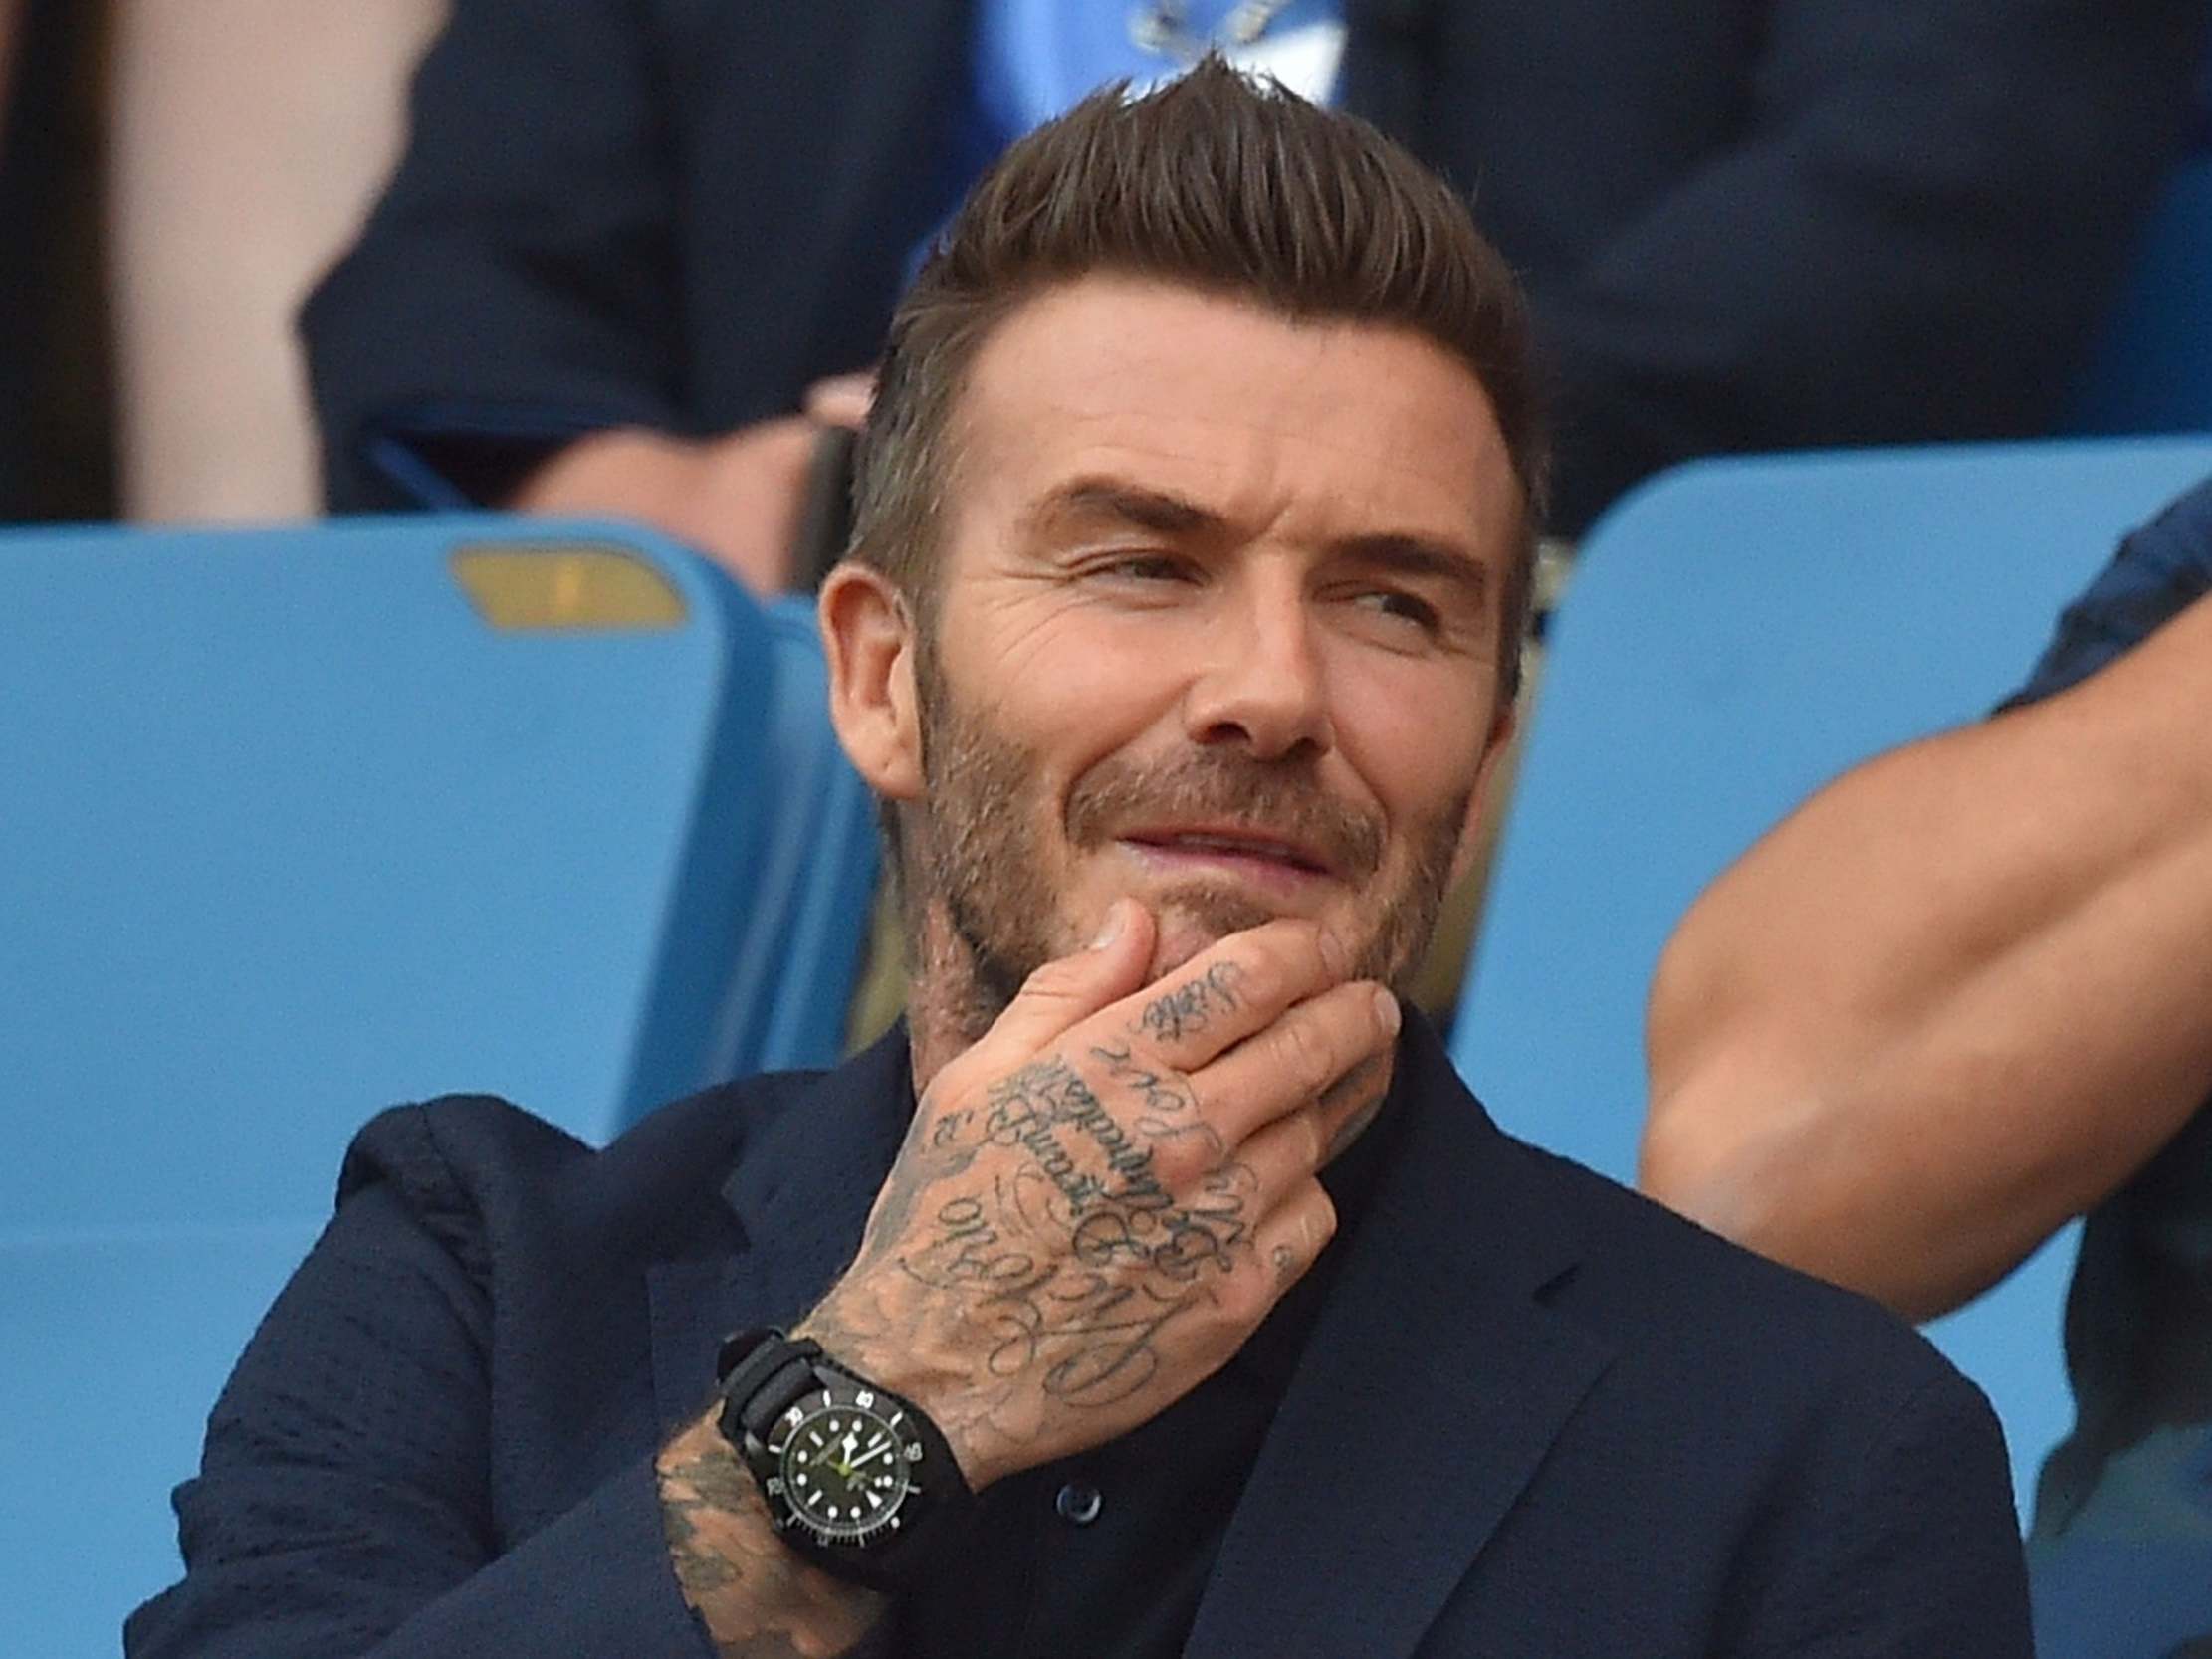 Beckham is busy recruiting for his new franchise